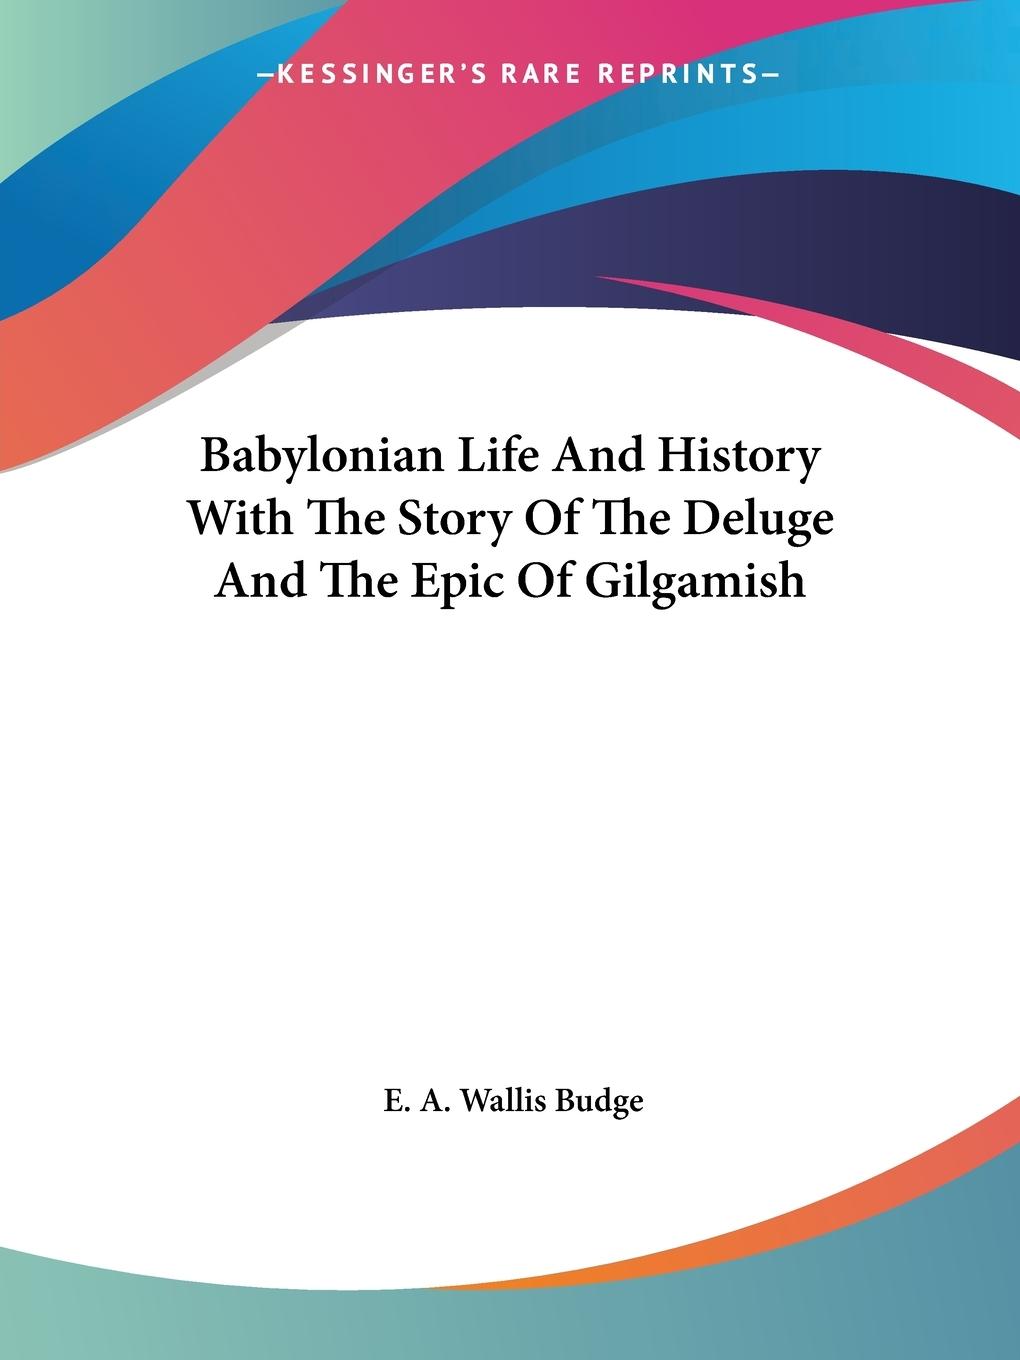 Babylonian Life And History With The Story Of The Deluge And The Epic Of Gilgamish - Budge, E. A. Wallis